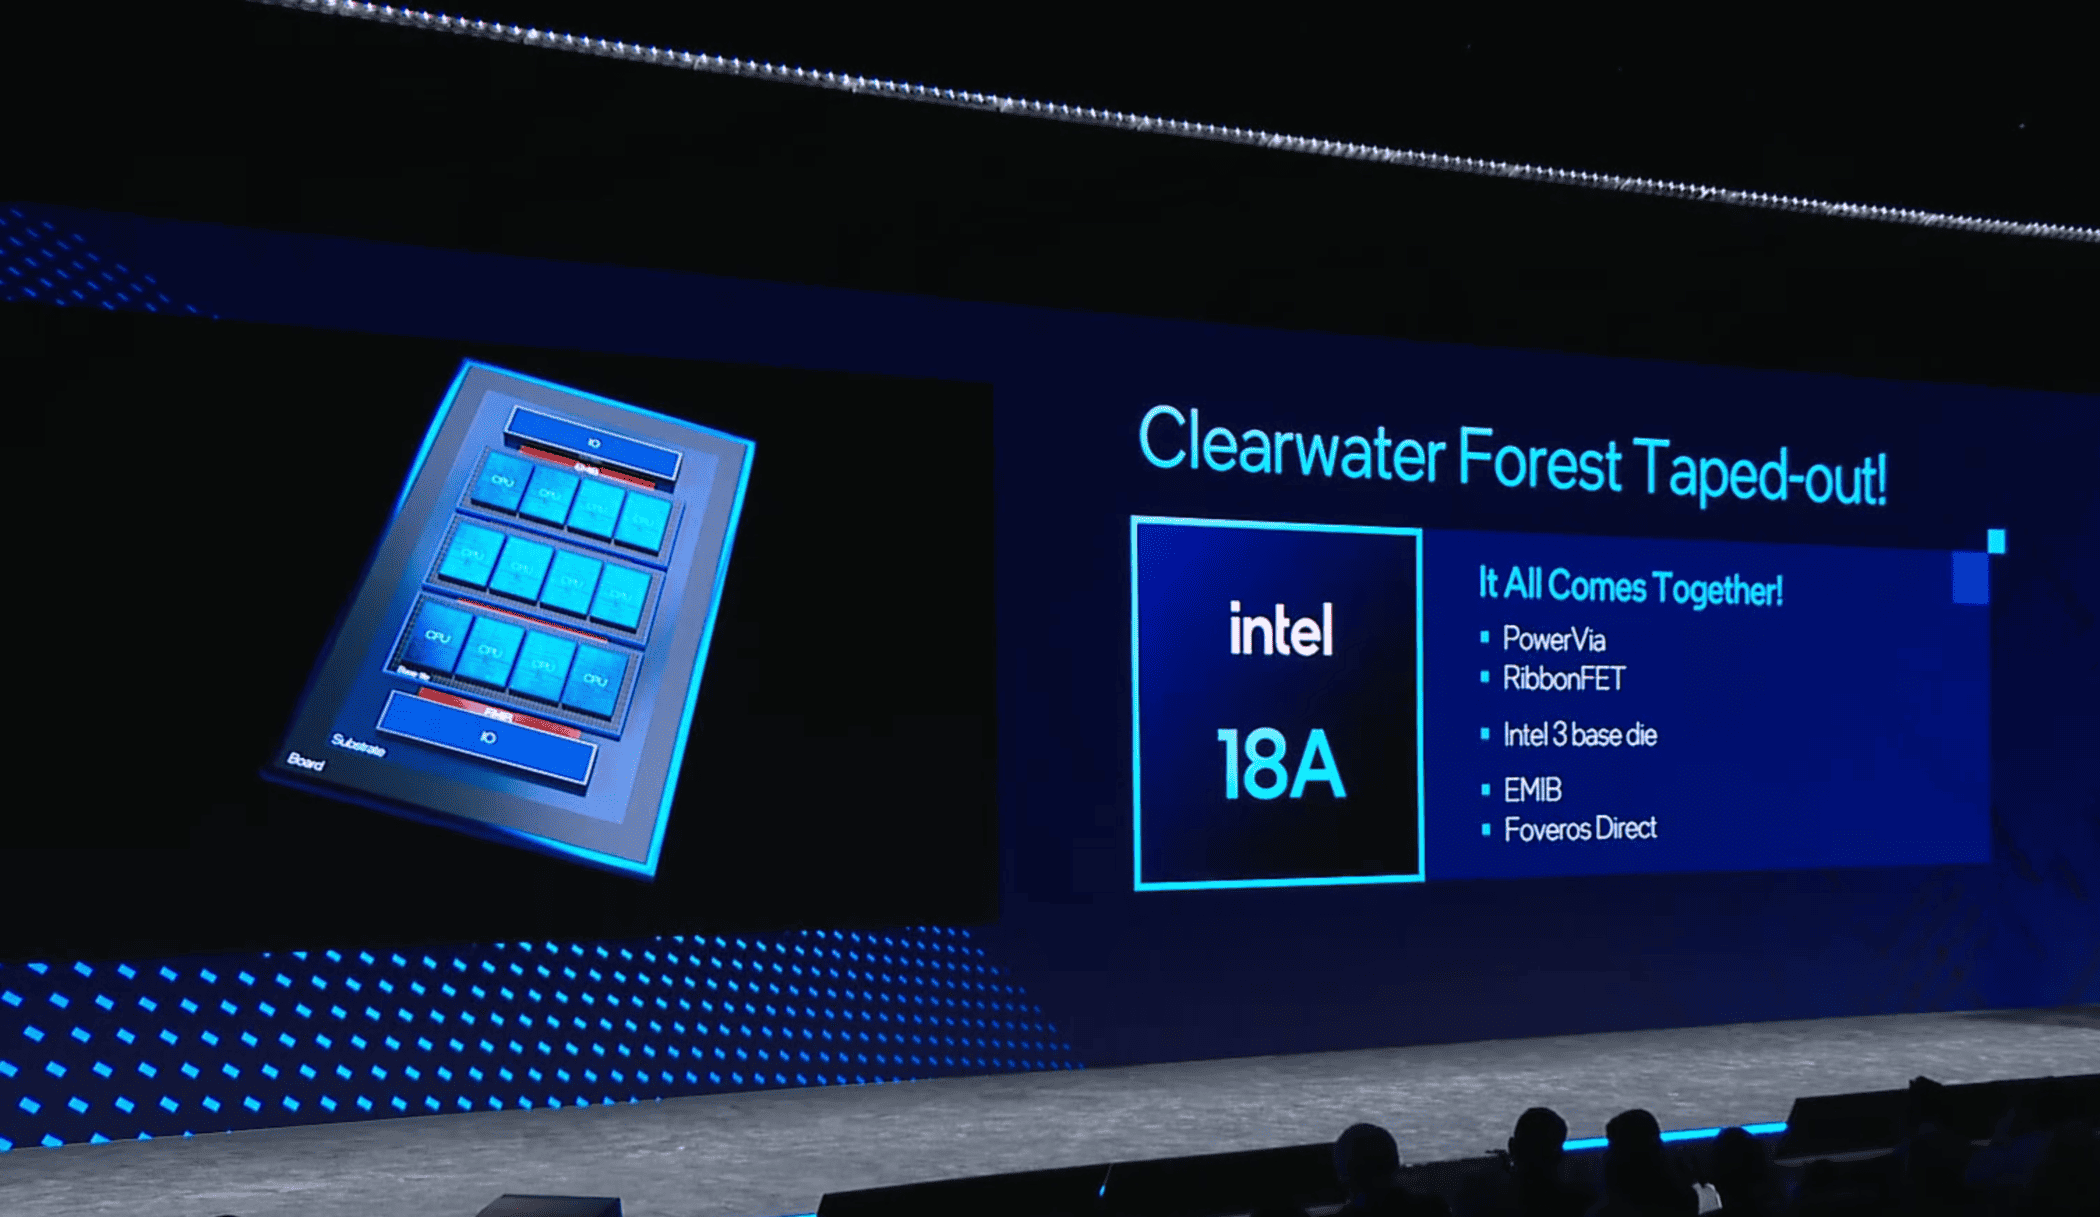 Intel Clearwater Forest CPUs